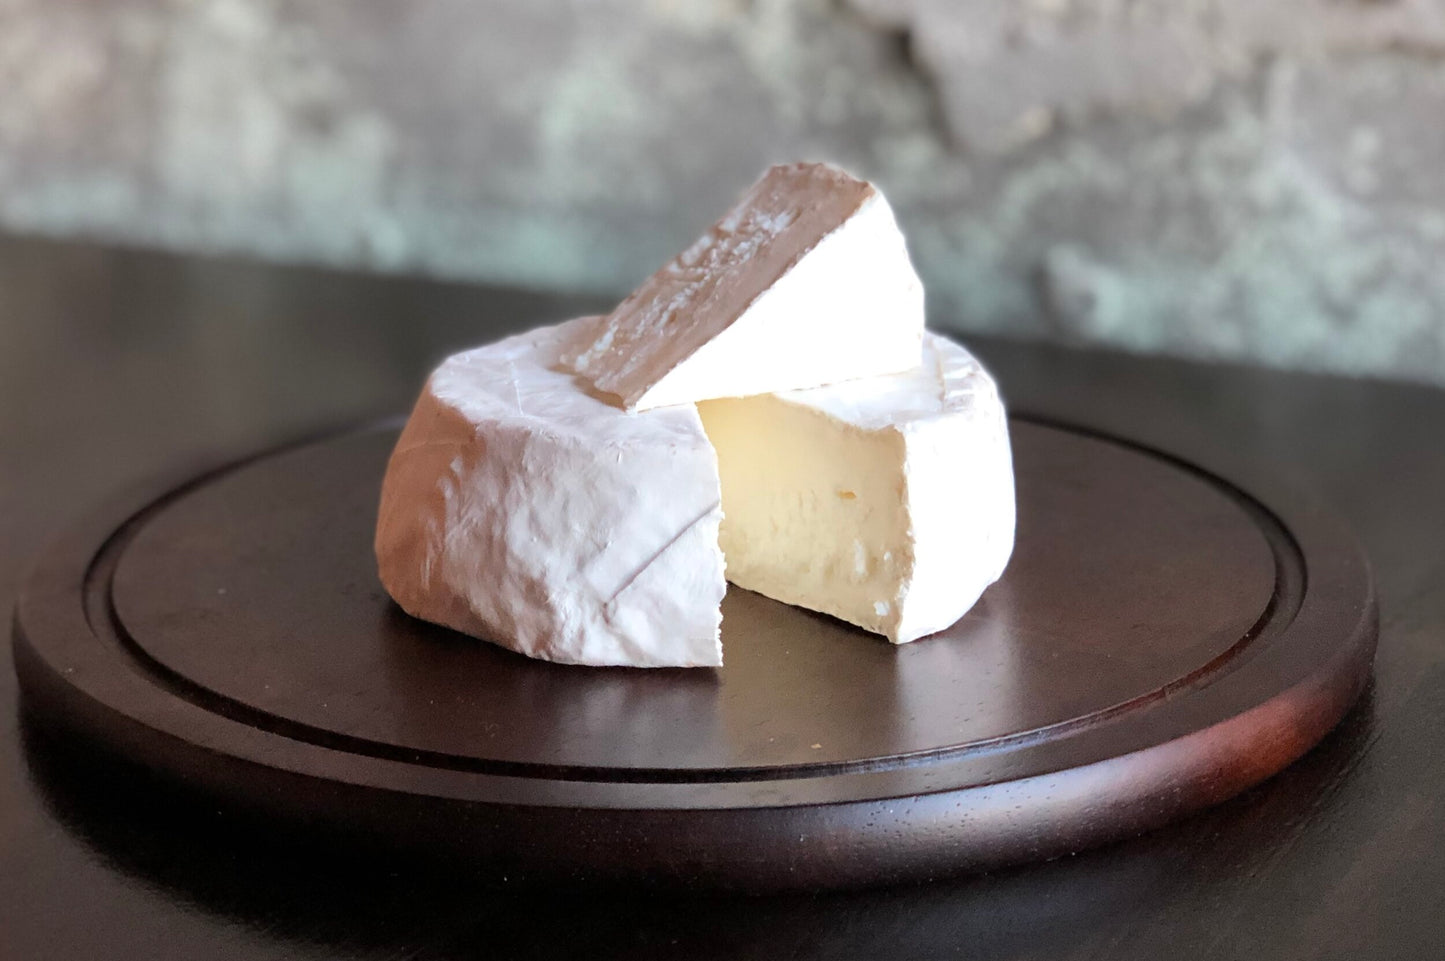 Package of Bent River cheese from Alemar Cheese Company